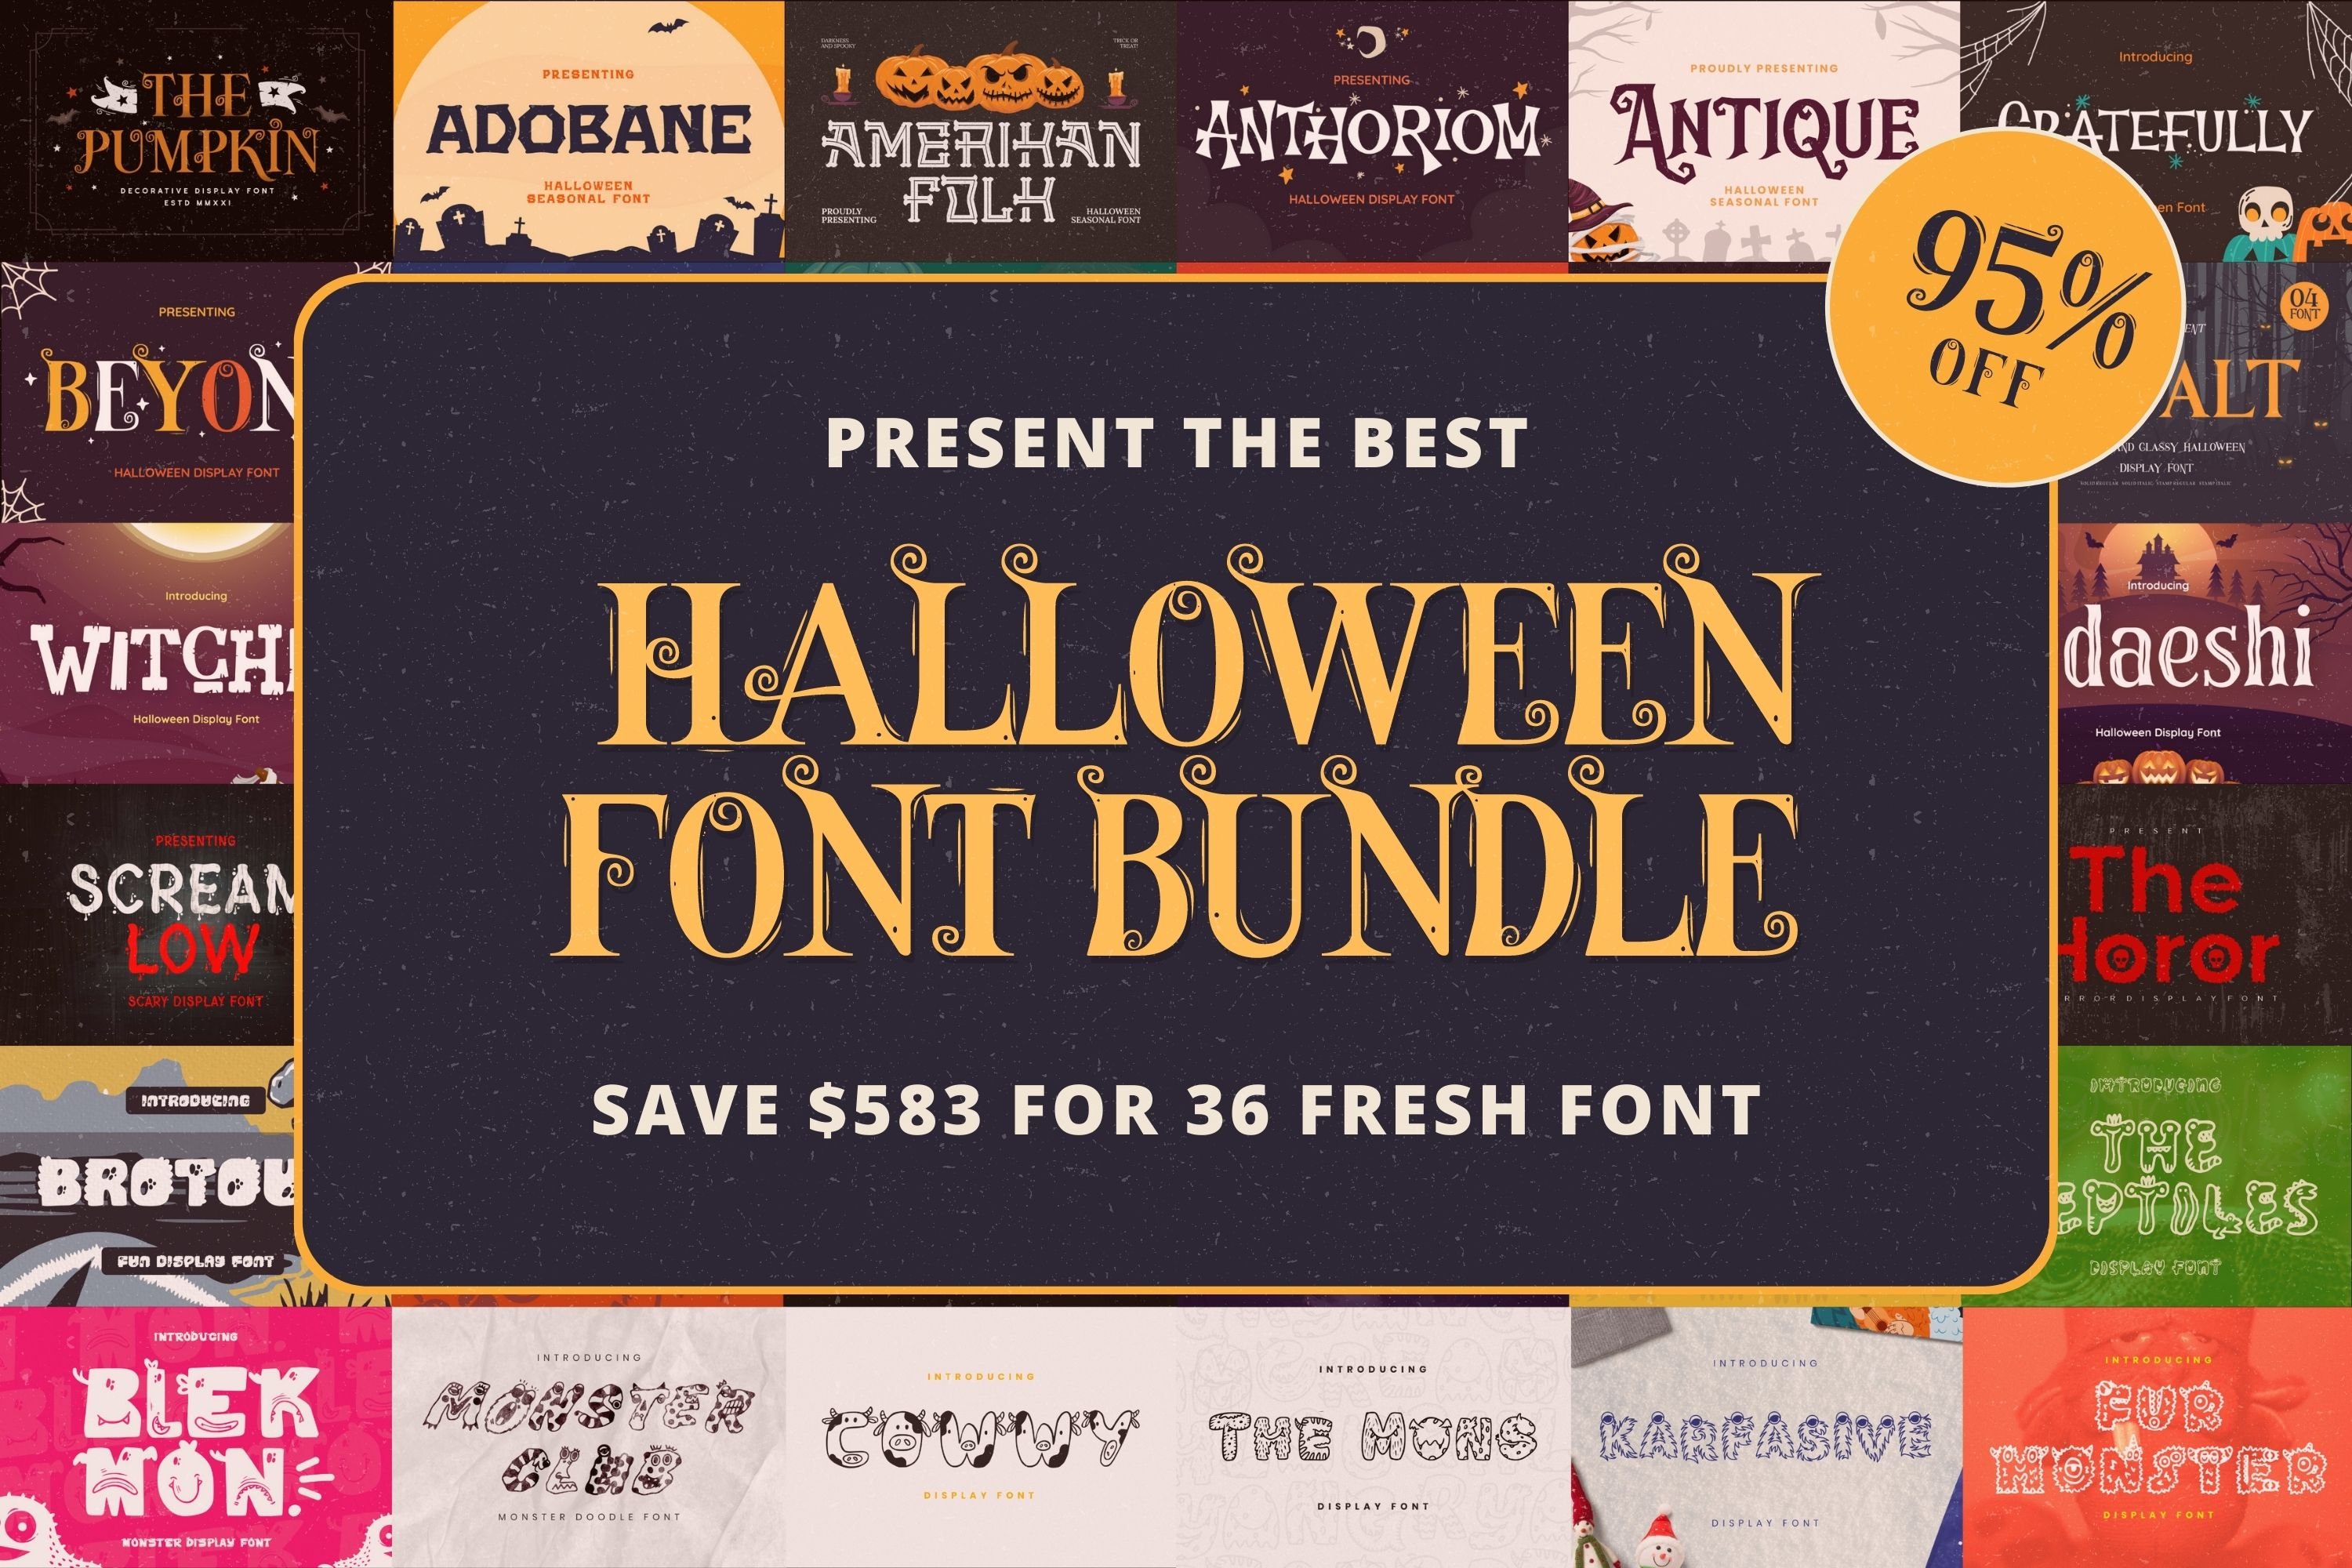 The Best Halloween Font Bundle cover image.